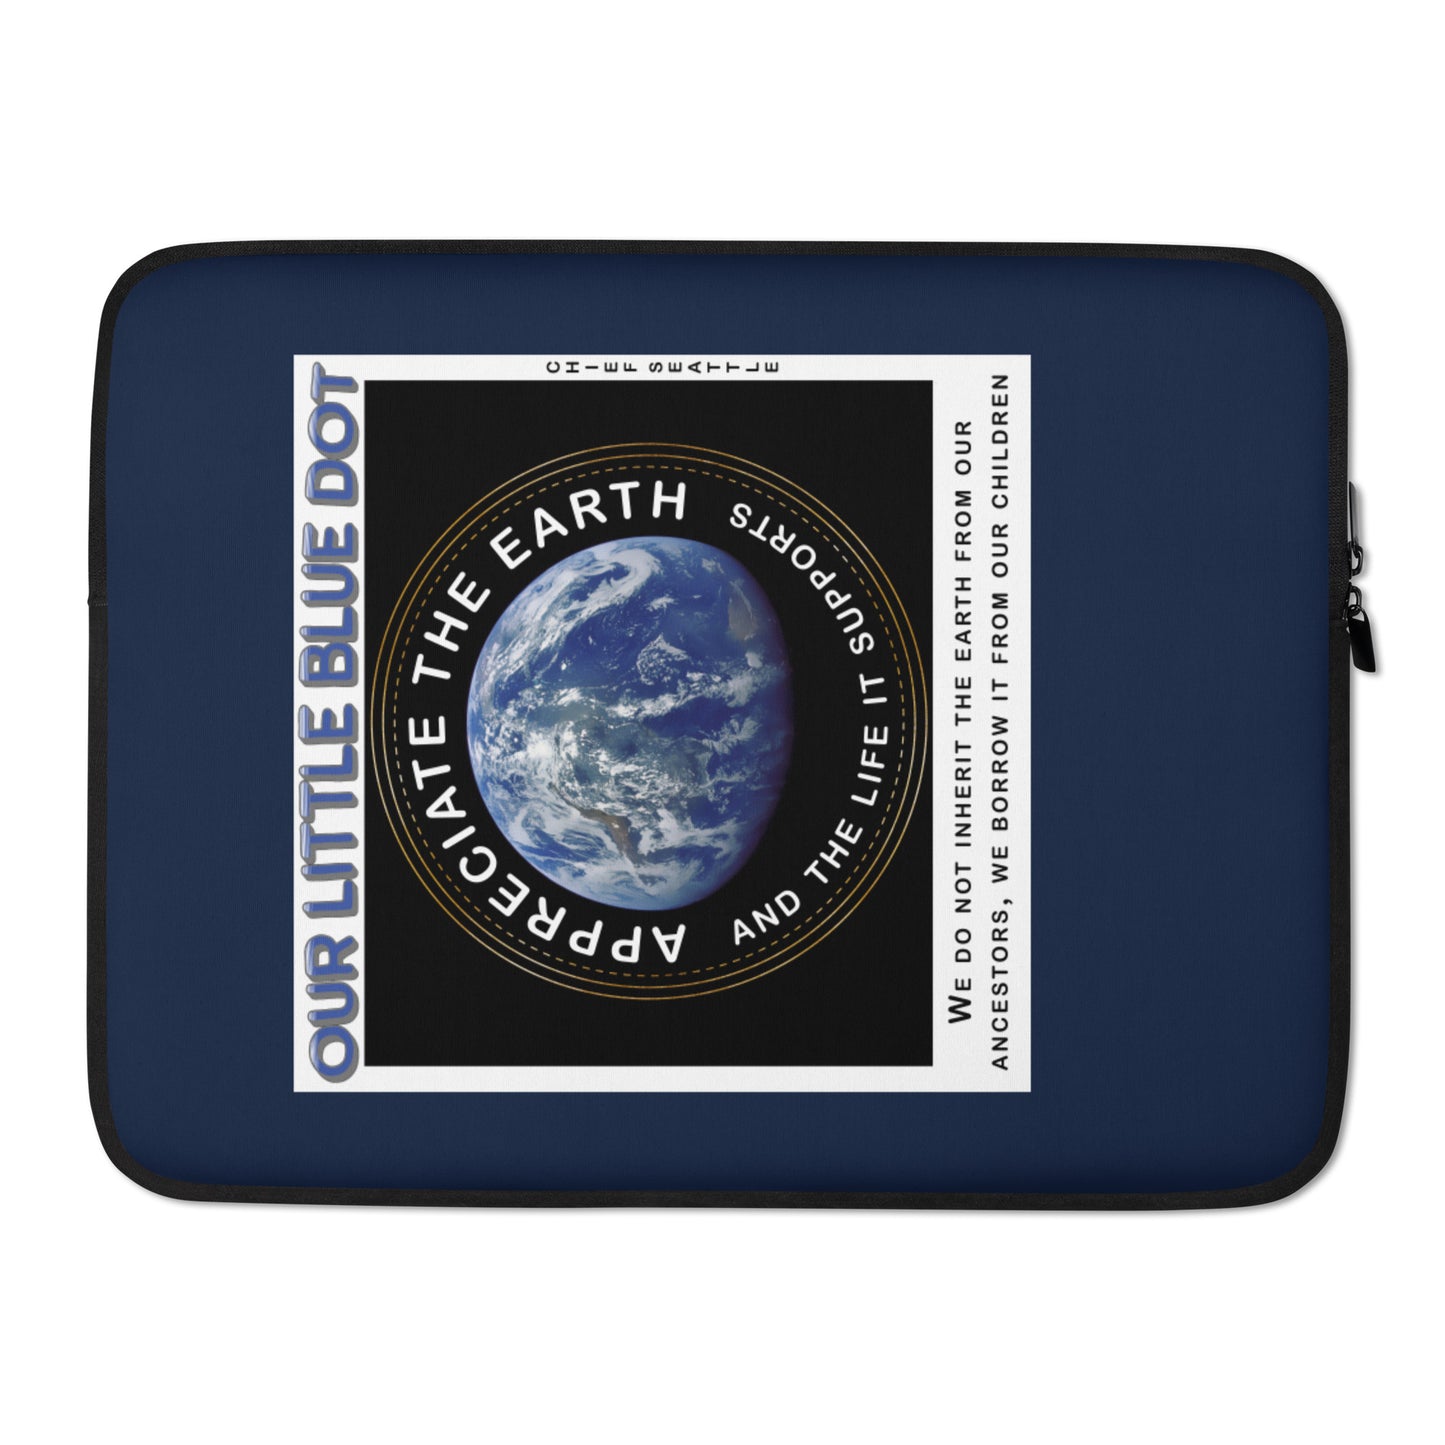 Laptop Sleeve - Appreciate The Earth, Chief Seattle